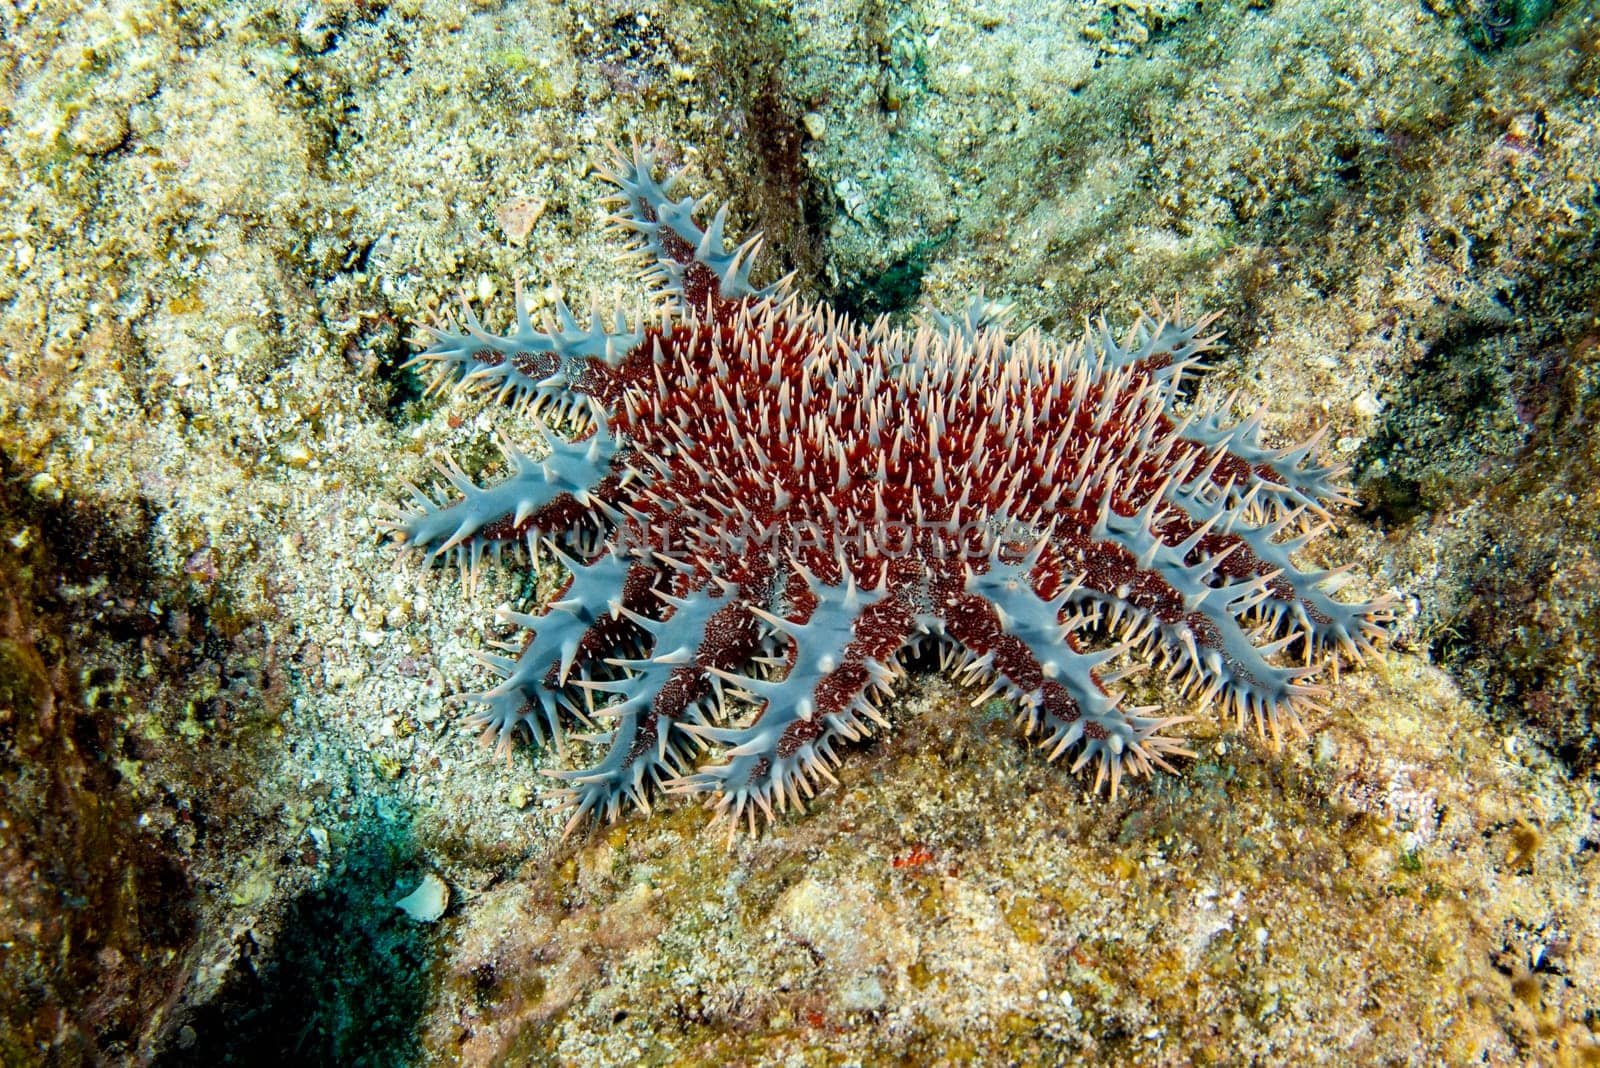 crown of thorns sea star eating a coraland bleaching it white